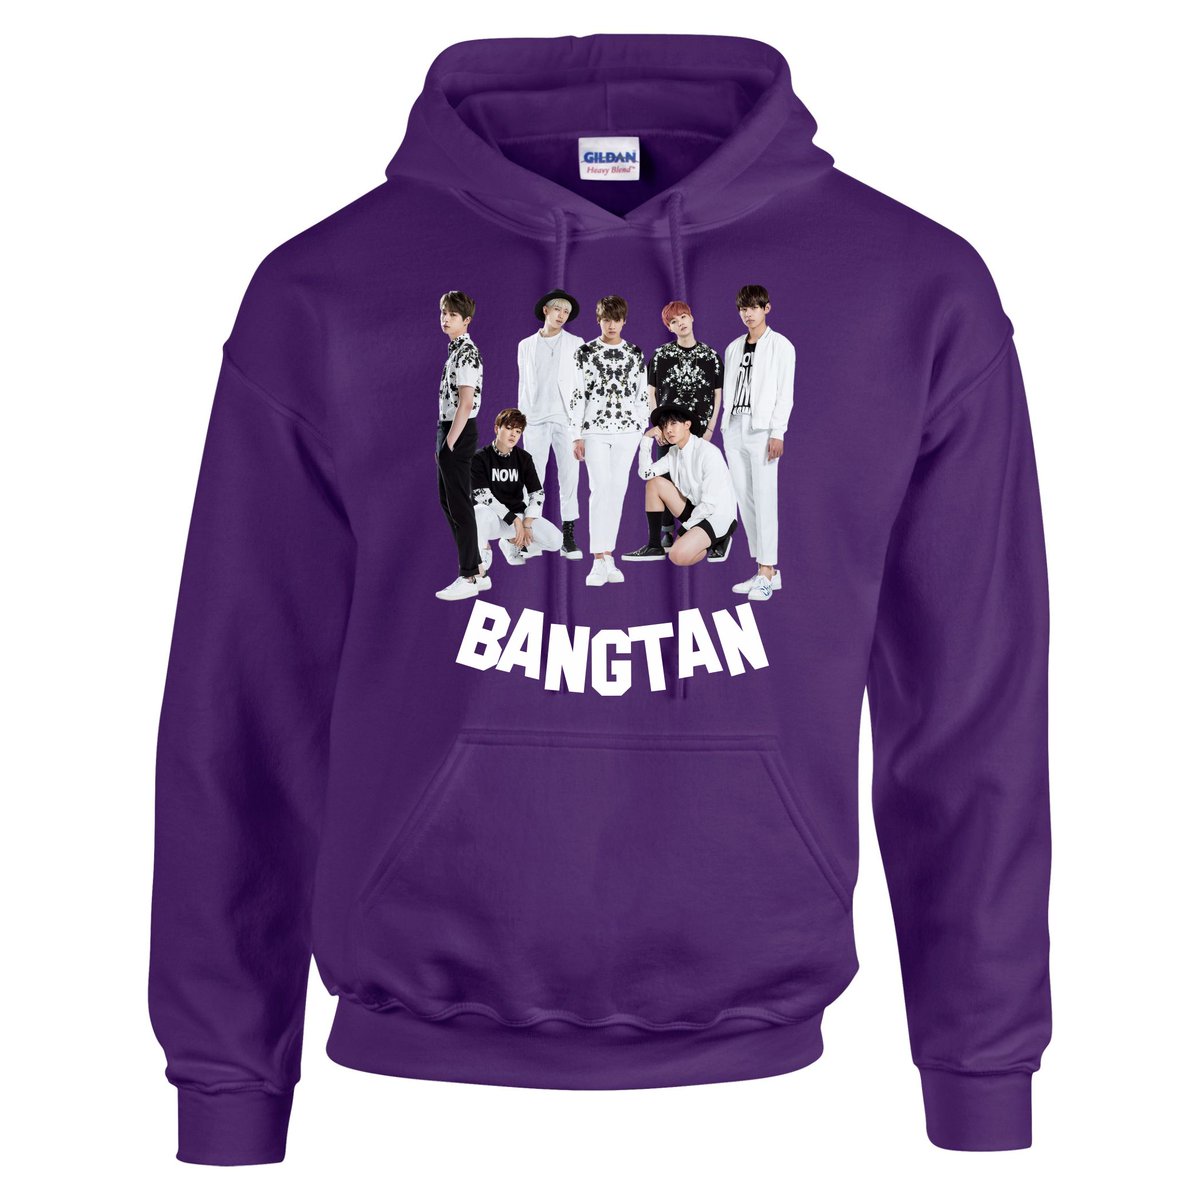 Ace Printwear On Twitter Treat Yourself Bts Fans With This Cute